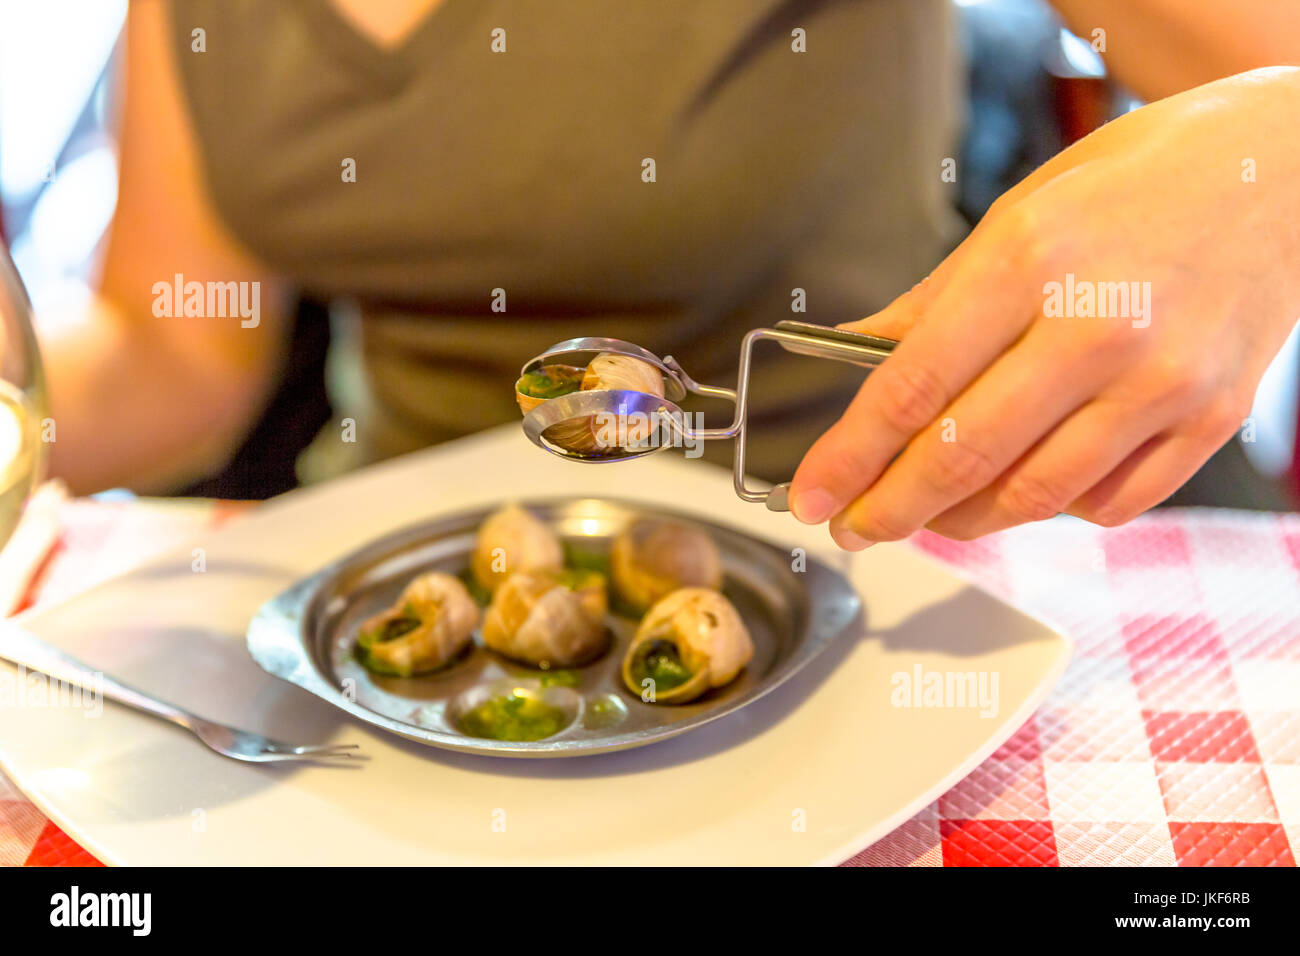 Eating snails in Paris Stock Photo